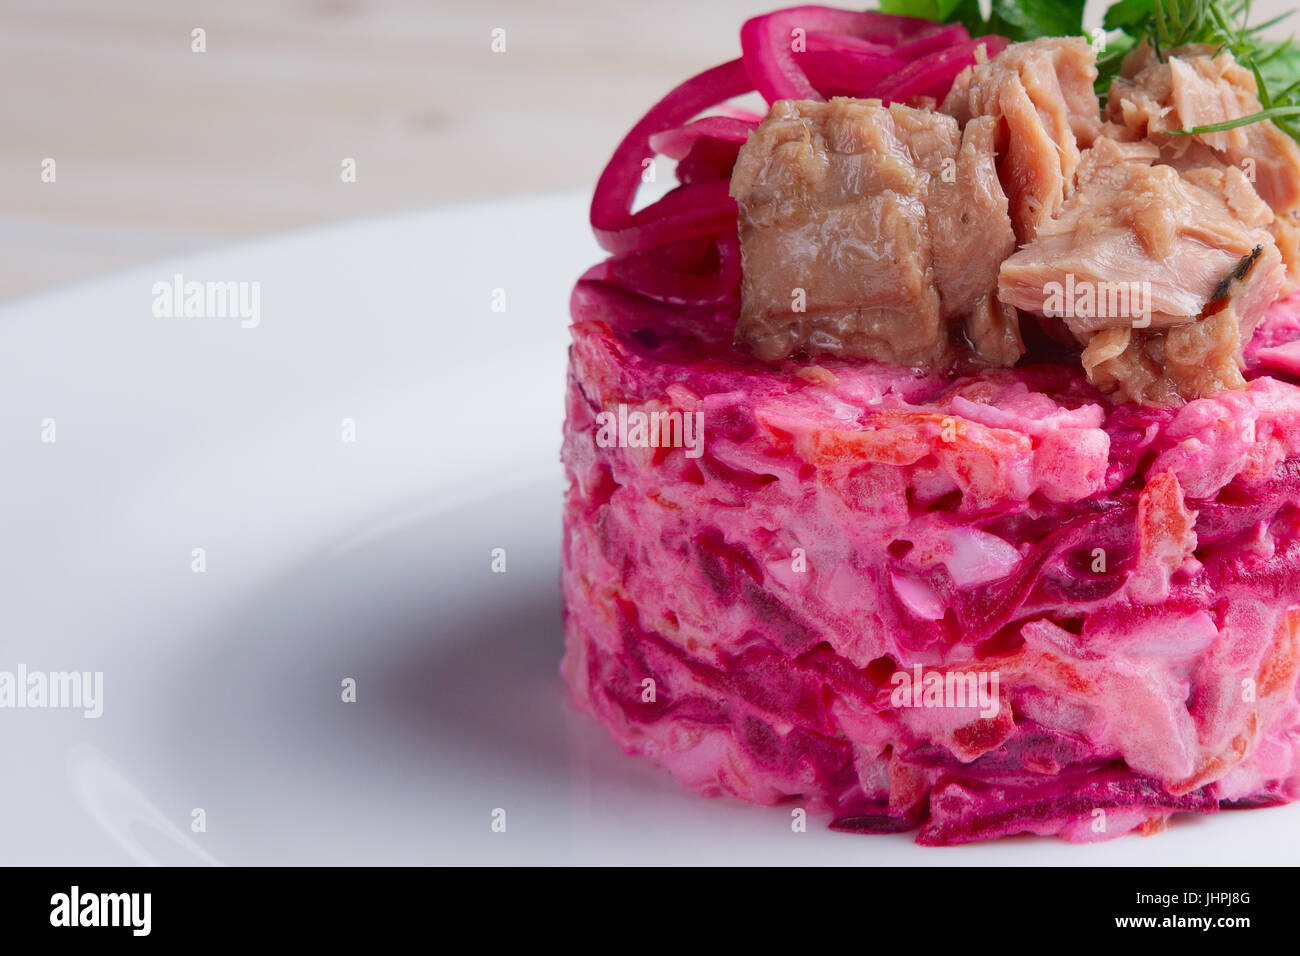 Closeup photo of salad with tuna, beetroot and carrot Stock Photo